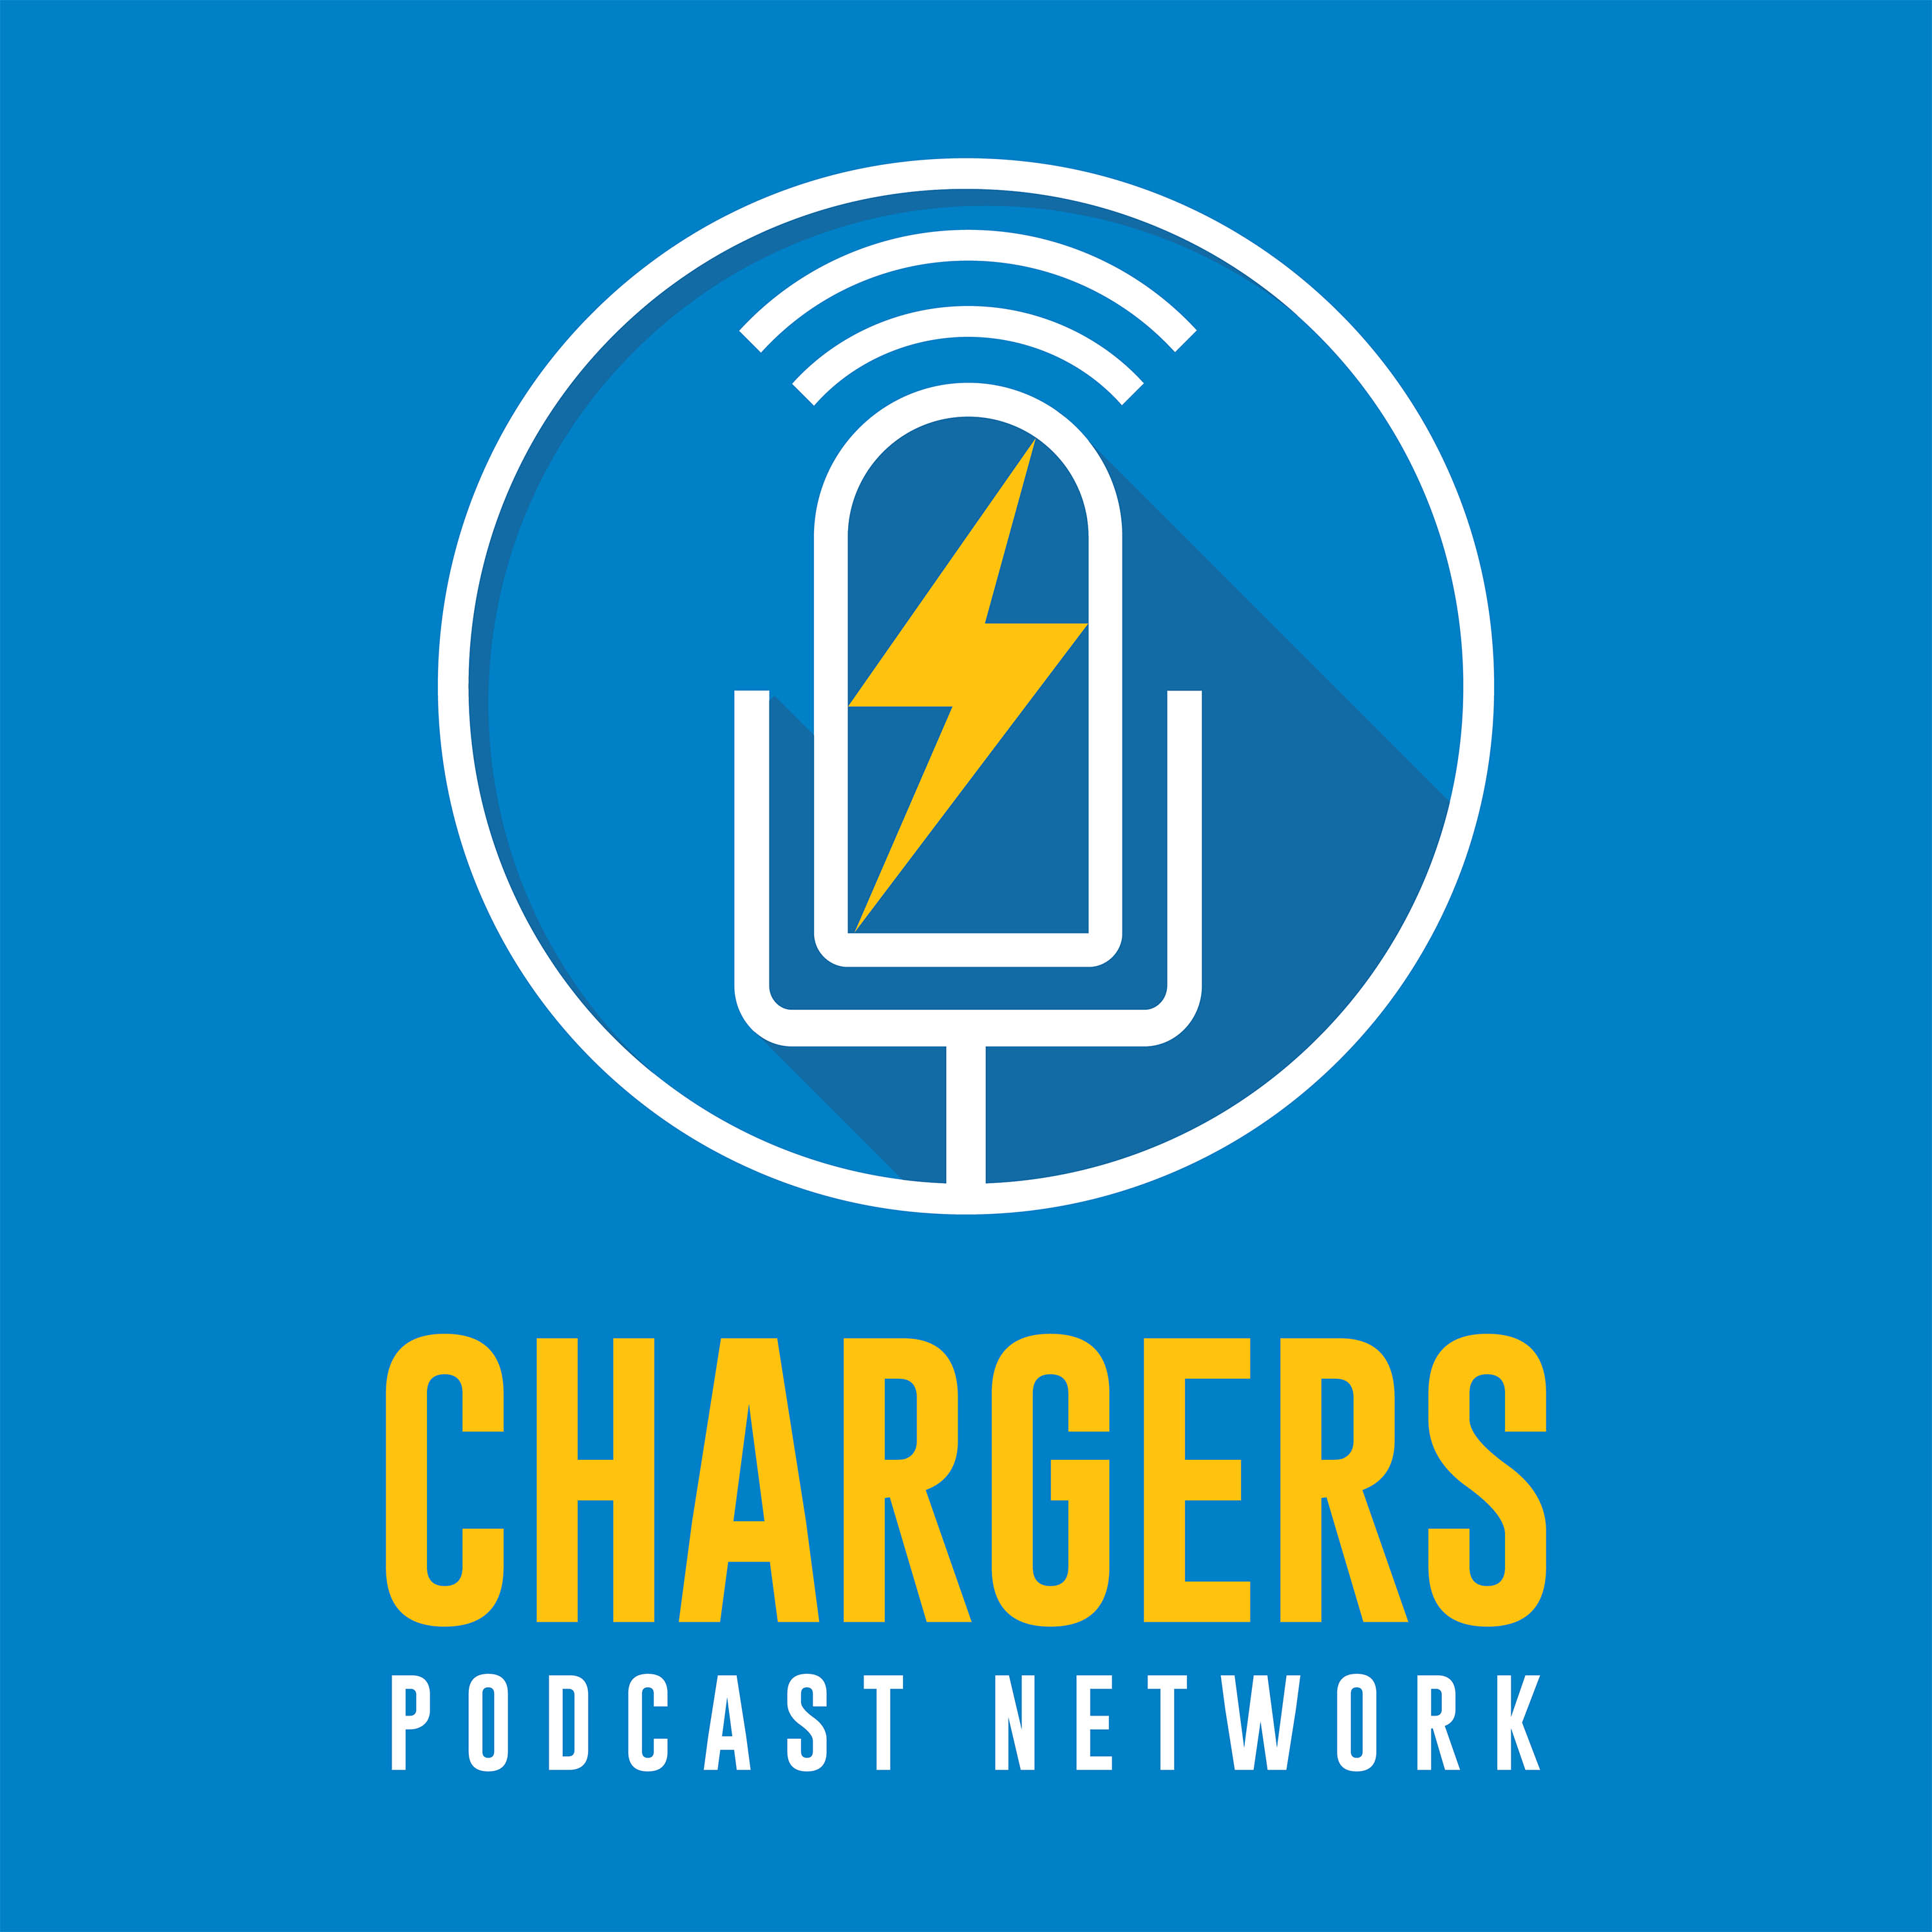 Chargers Weekly Podcast: NFL Network's Steve Wyche, Lakers.com's Mike Trudell